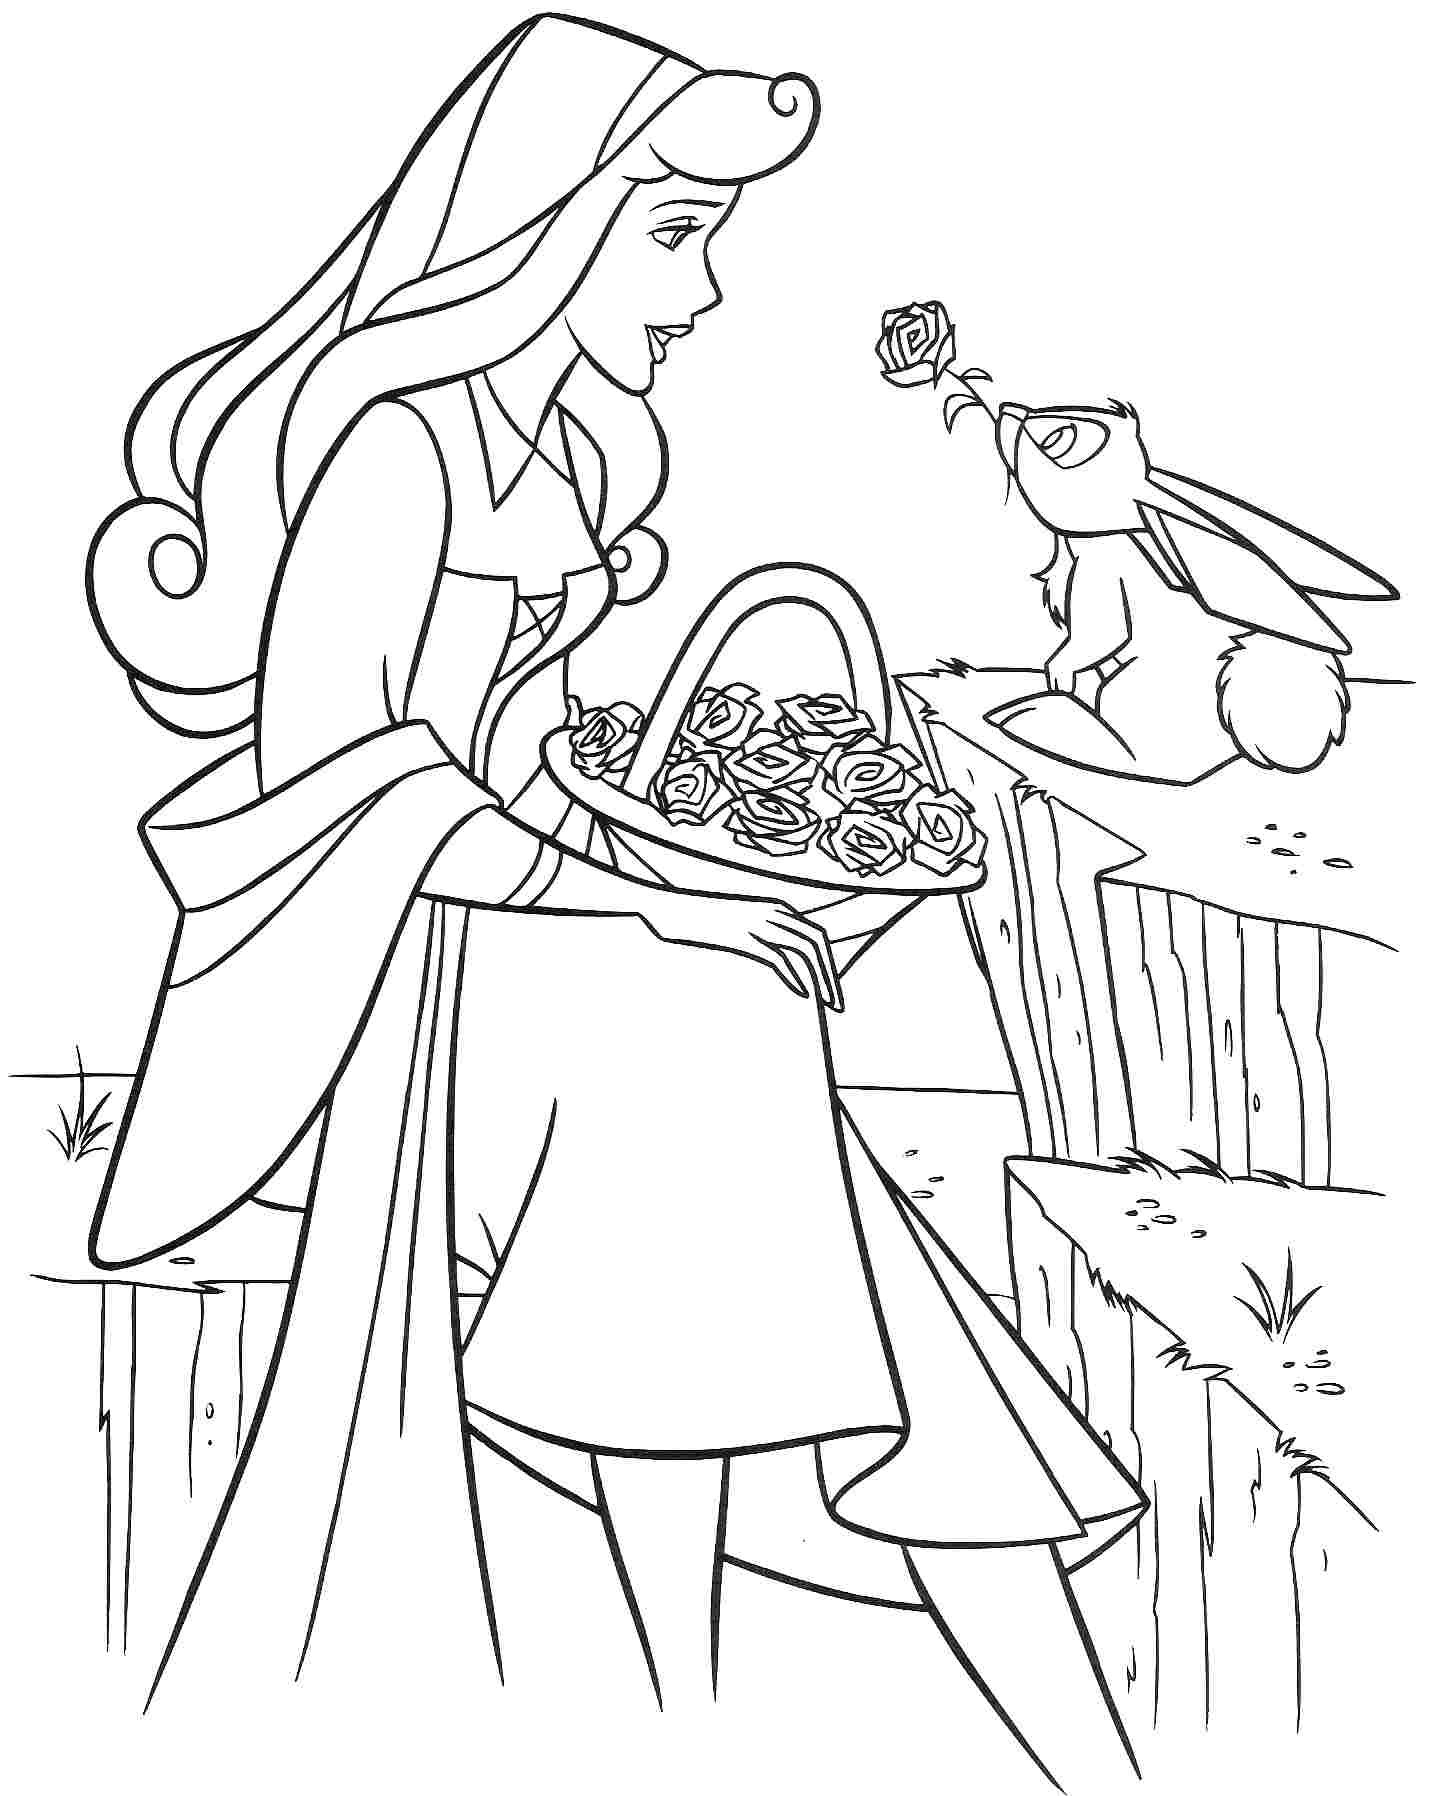 Sleeping Beauty Coloring Pages
 Free Printable Sleeping Beauty Coloring Pages For Kids